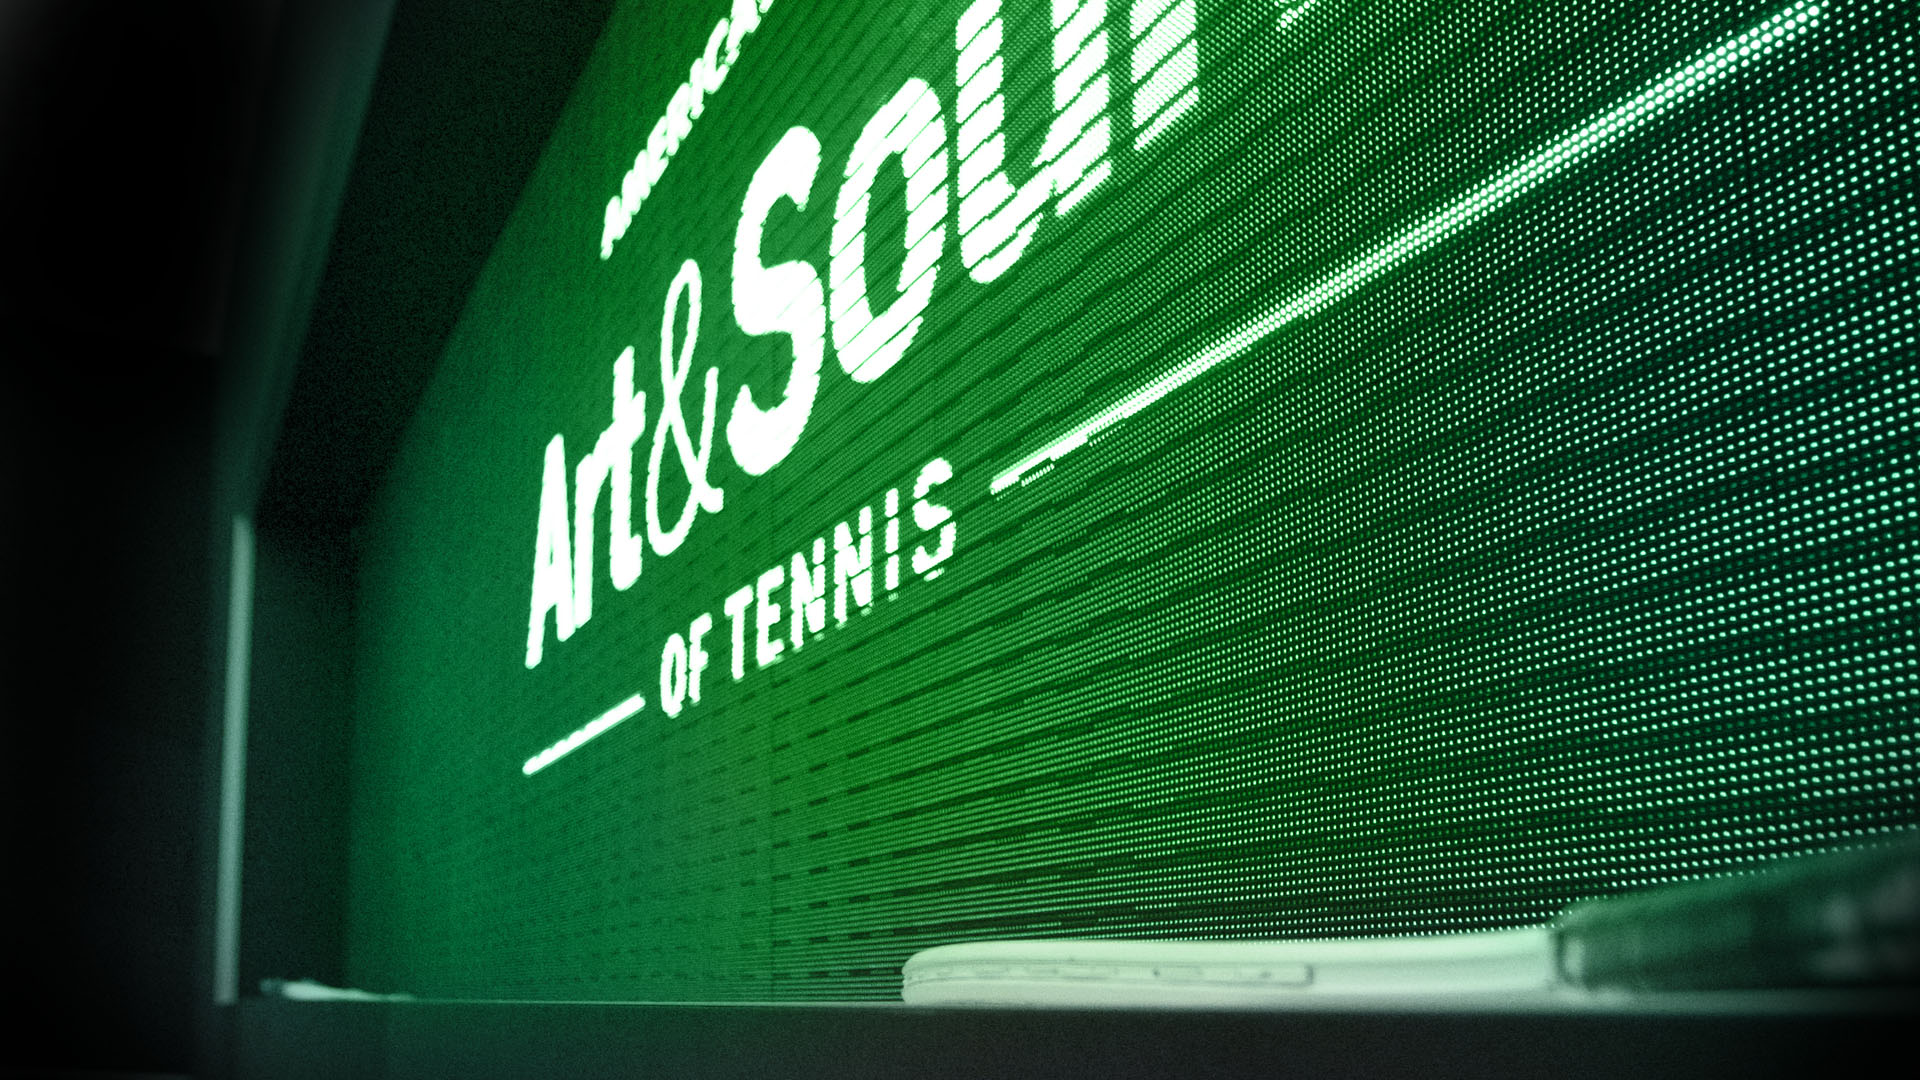 Art and Sound of Tennis - 30 foot led wall